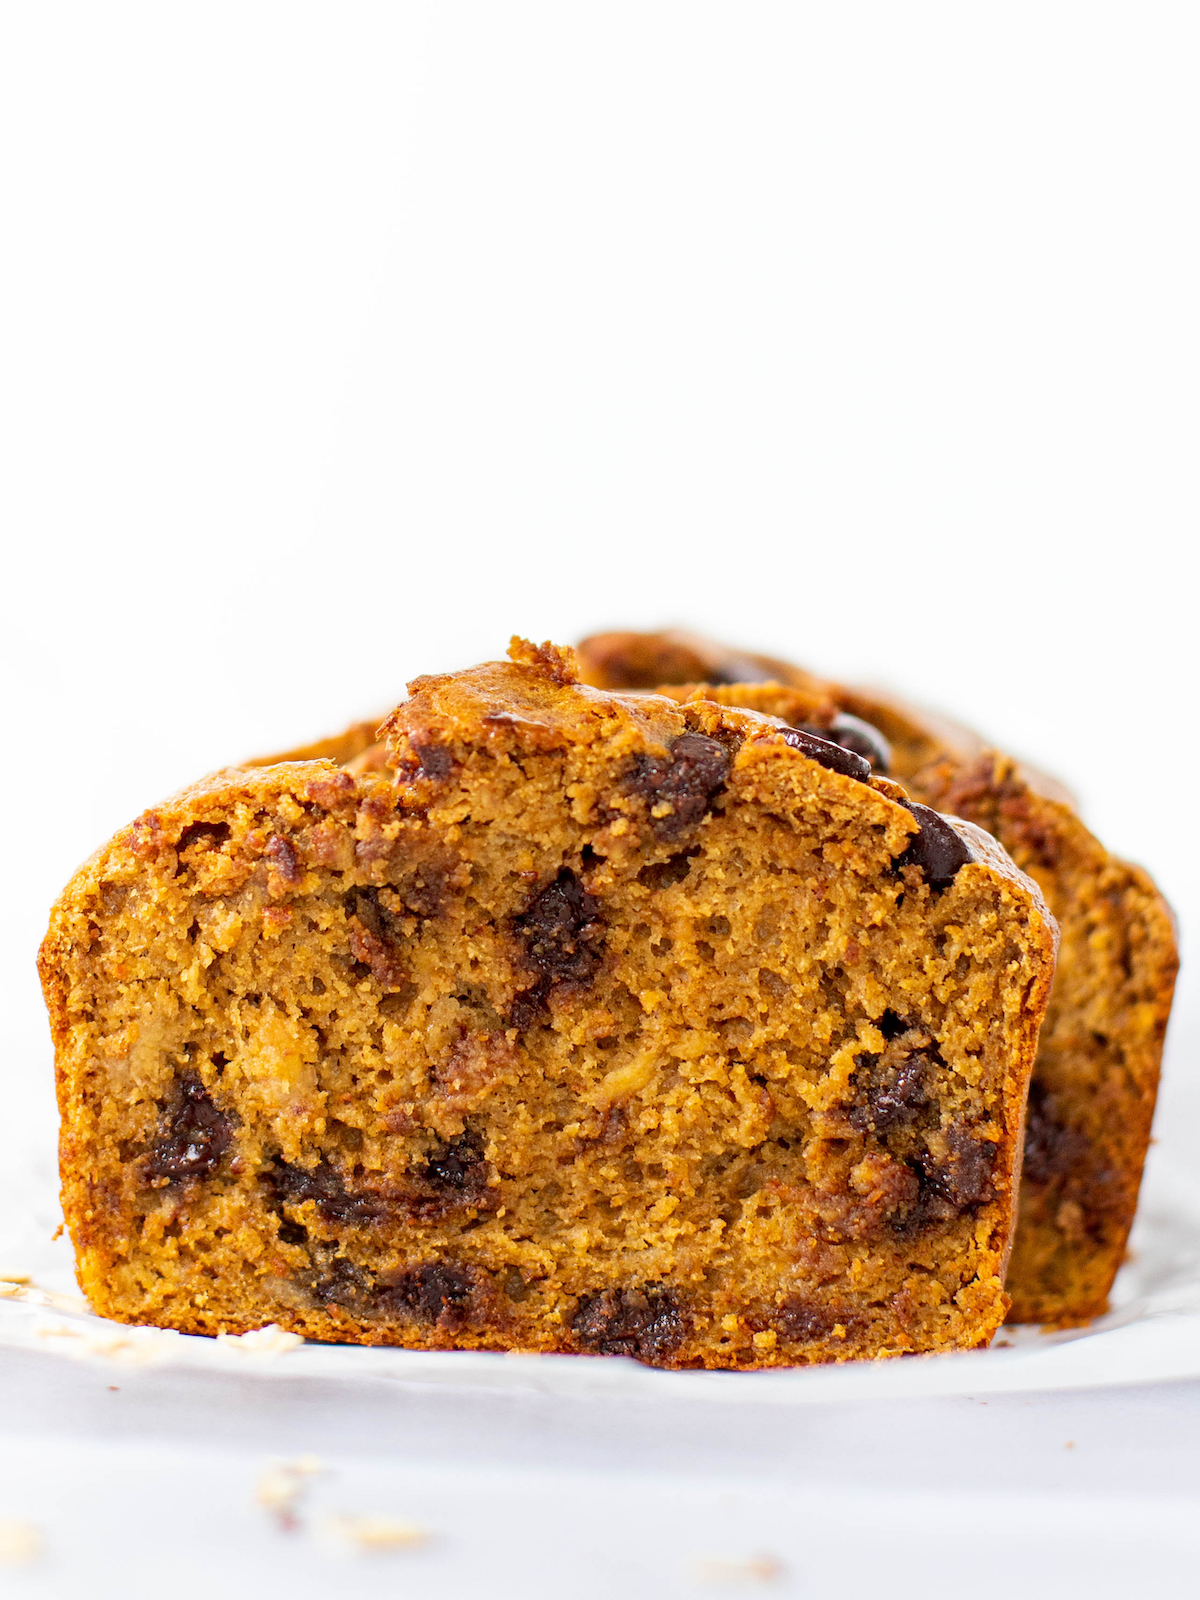 Slice of banana bread with chocolate chips.